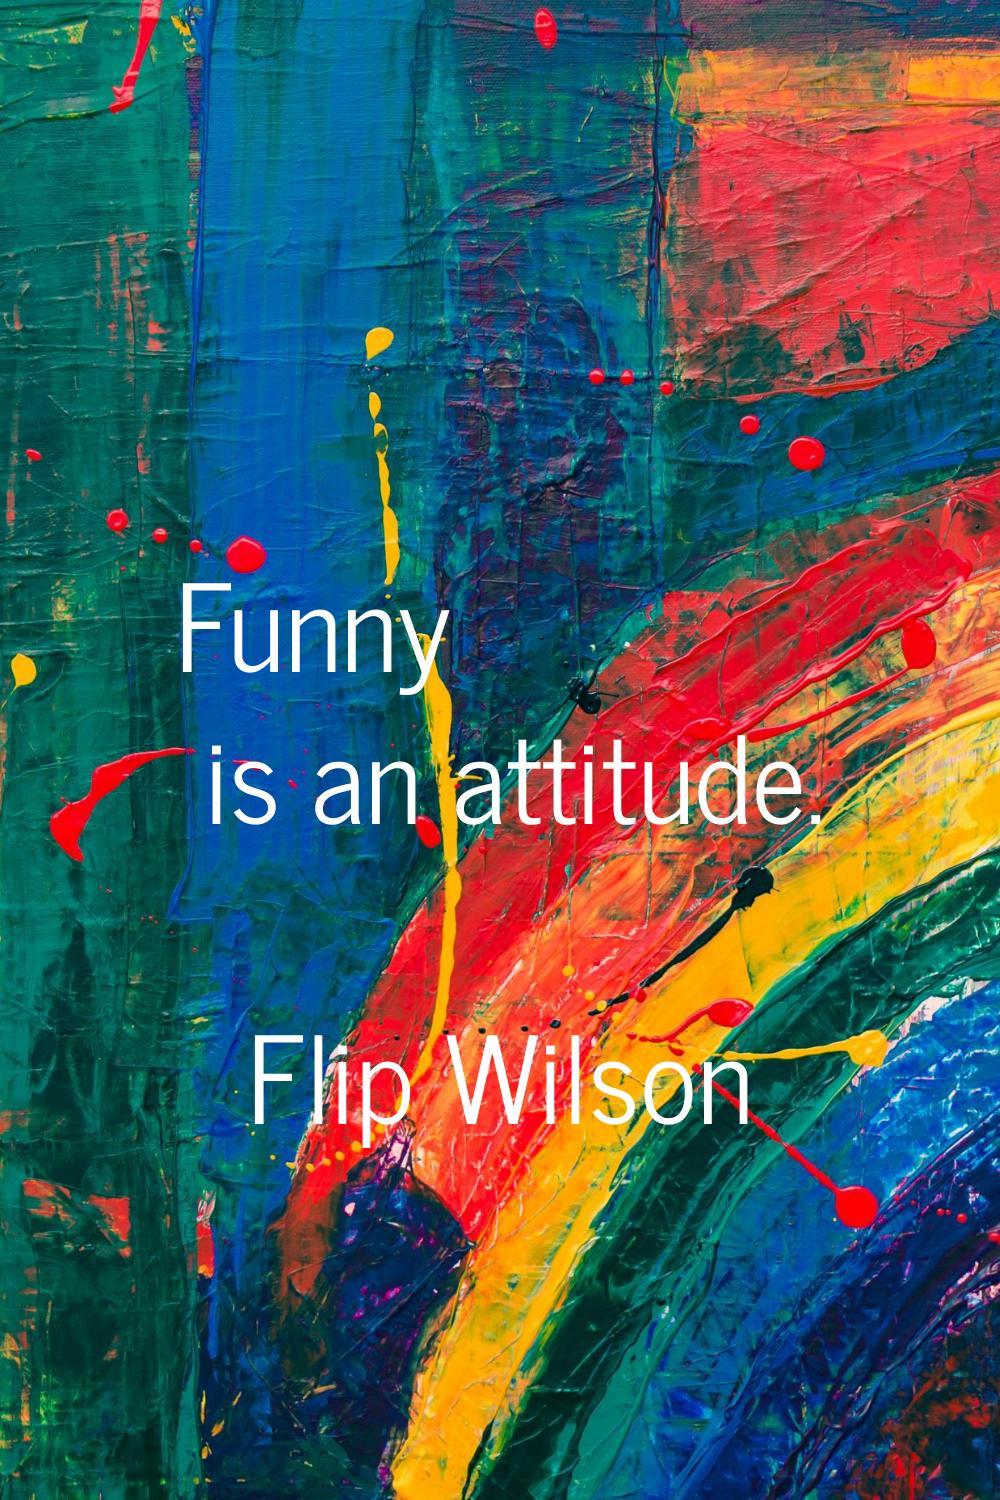 Funny is an attitude.